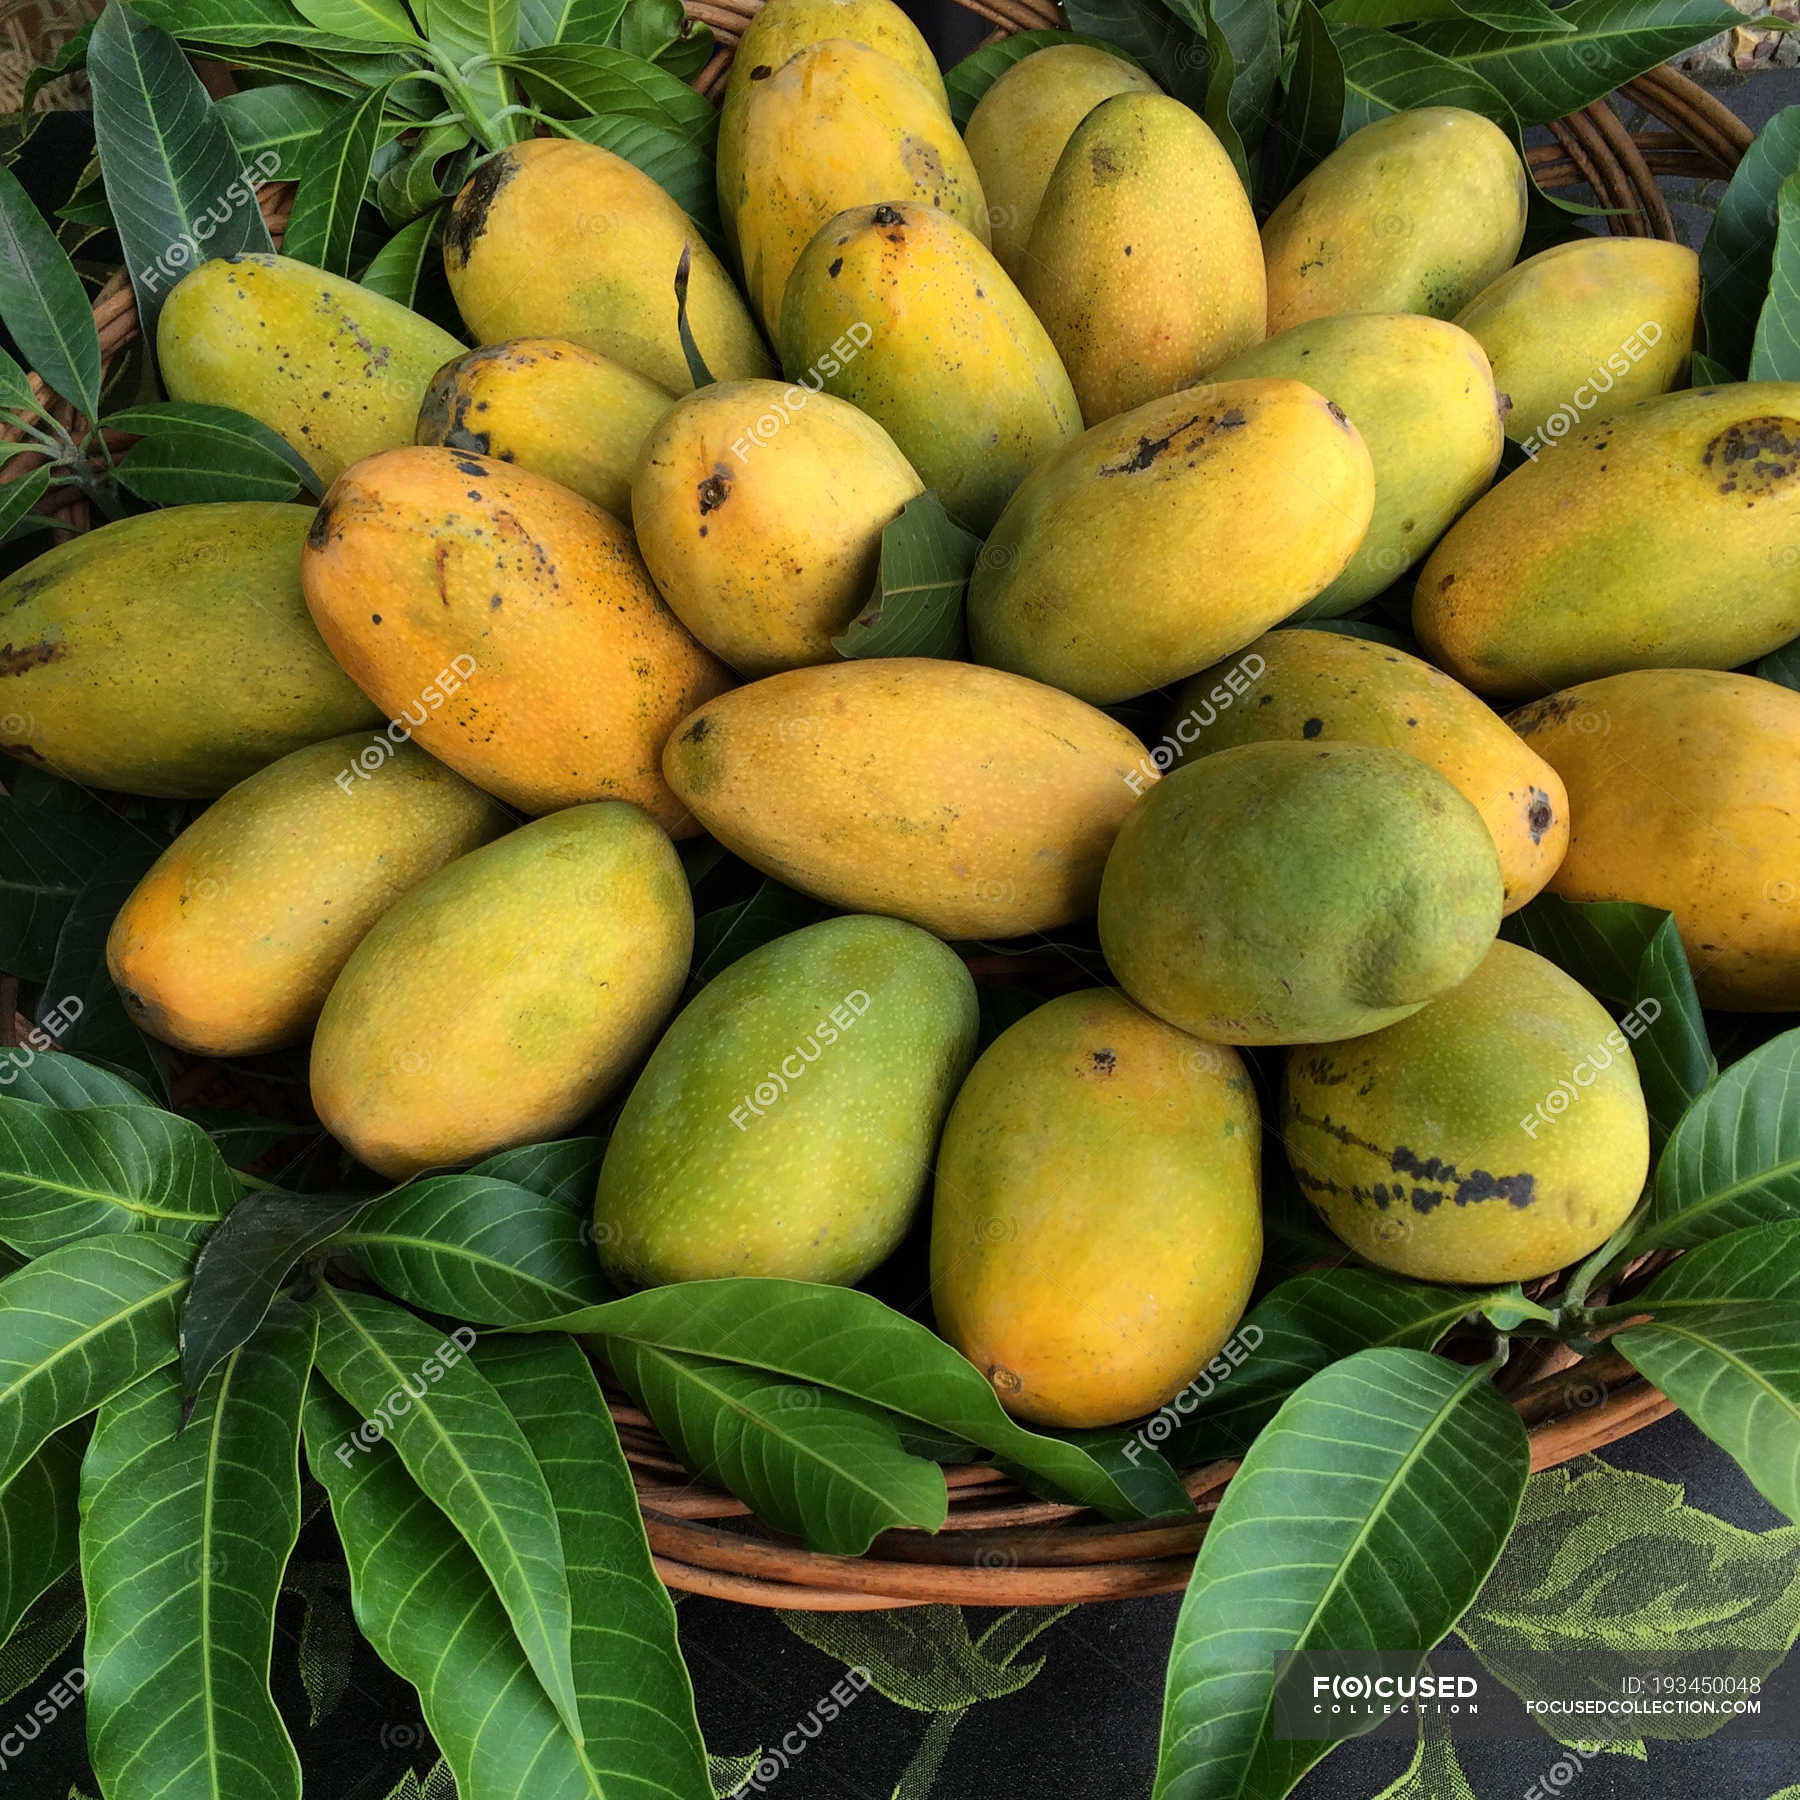 Albums 95+ Pictures Picture Of A Ripe Mango Stunning